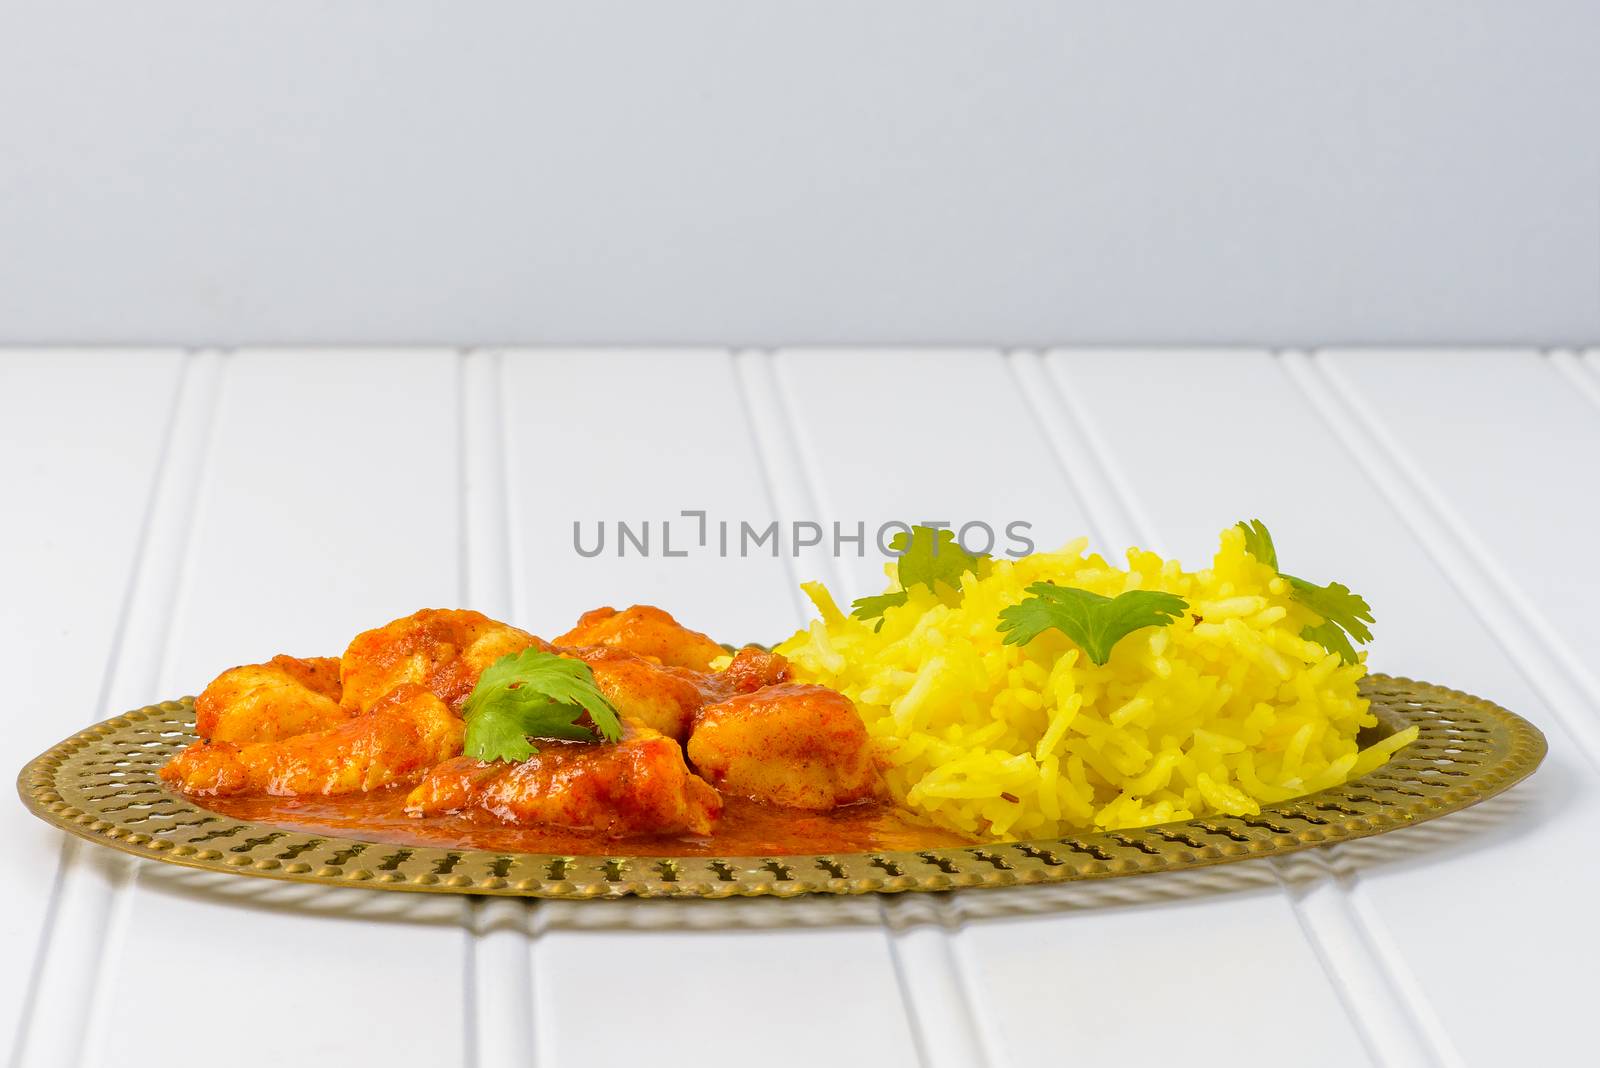 Plate of spicy chicken vindaloo served with basmati rice.